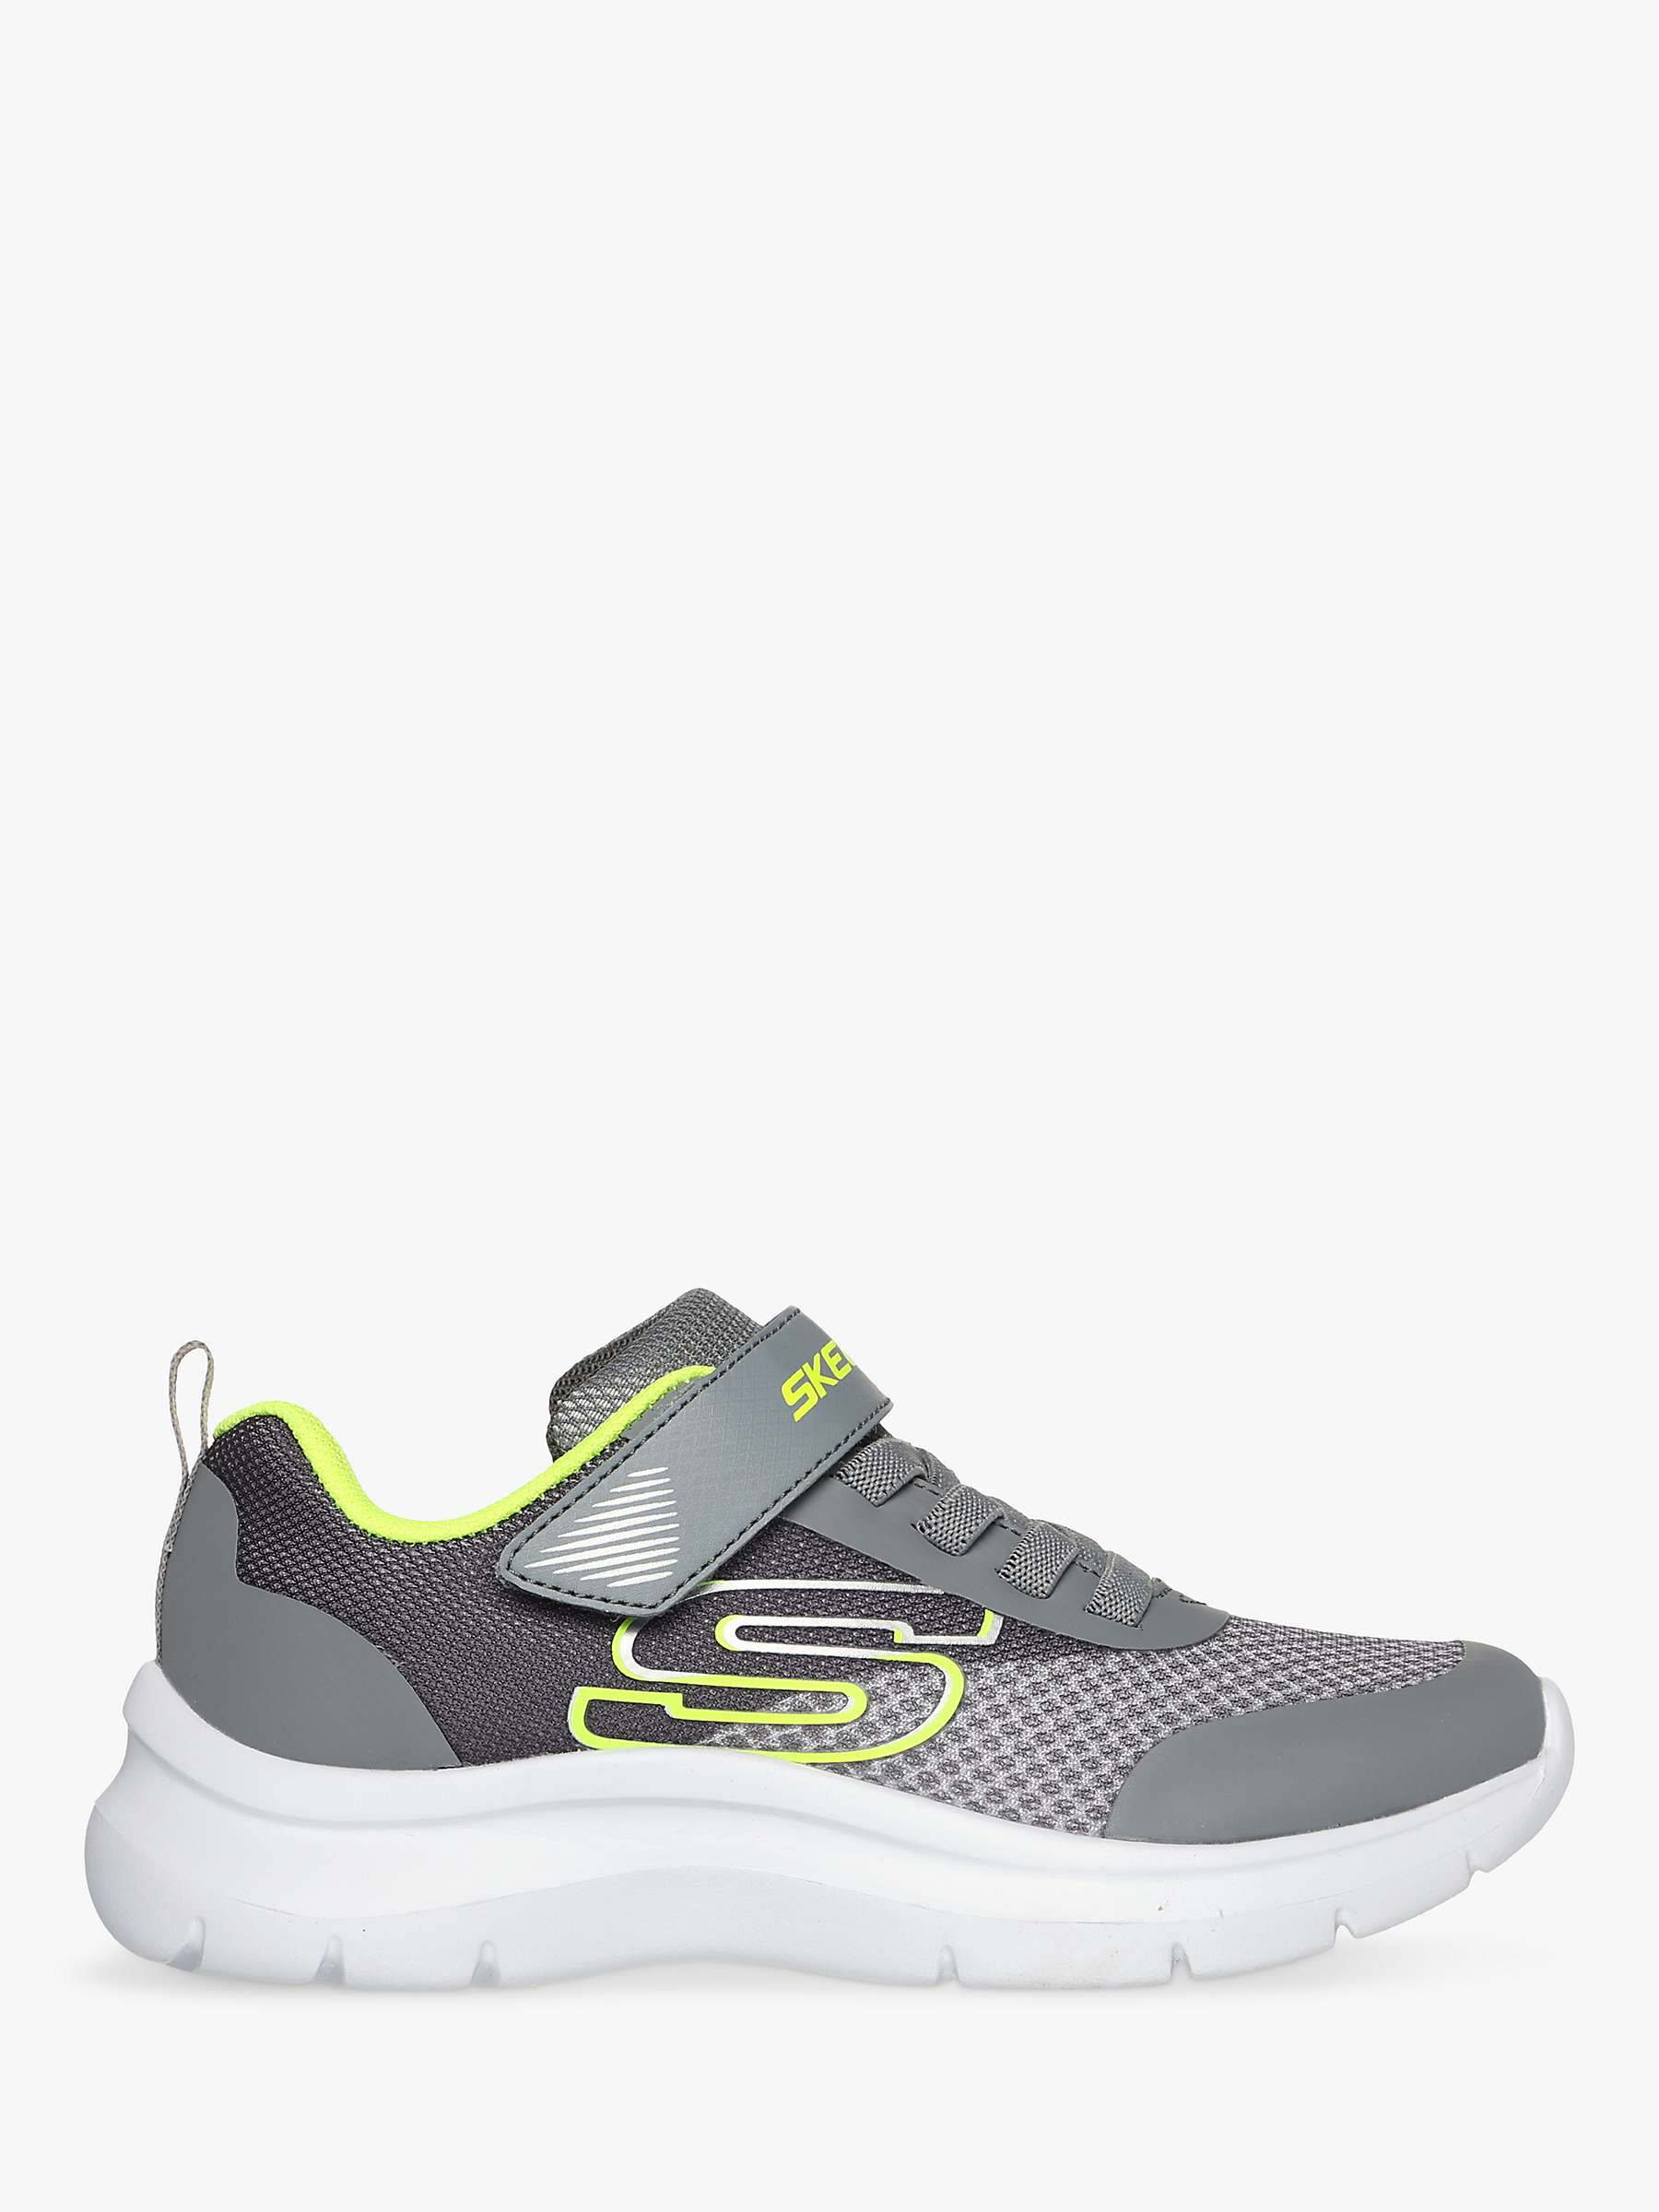 Buy Skechers Kids' Skech Fast Solar Squad Trainers Online at johnlewis.com